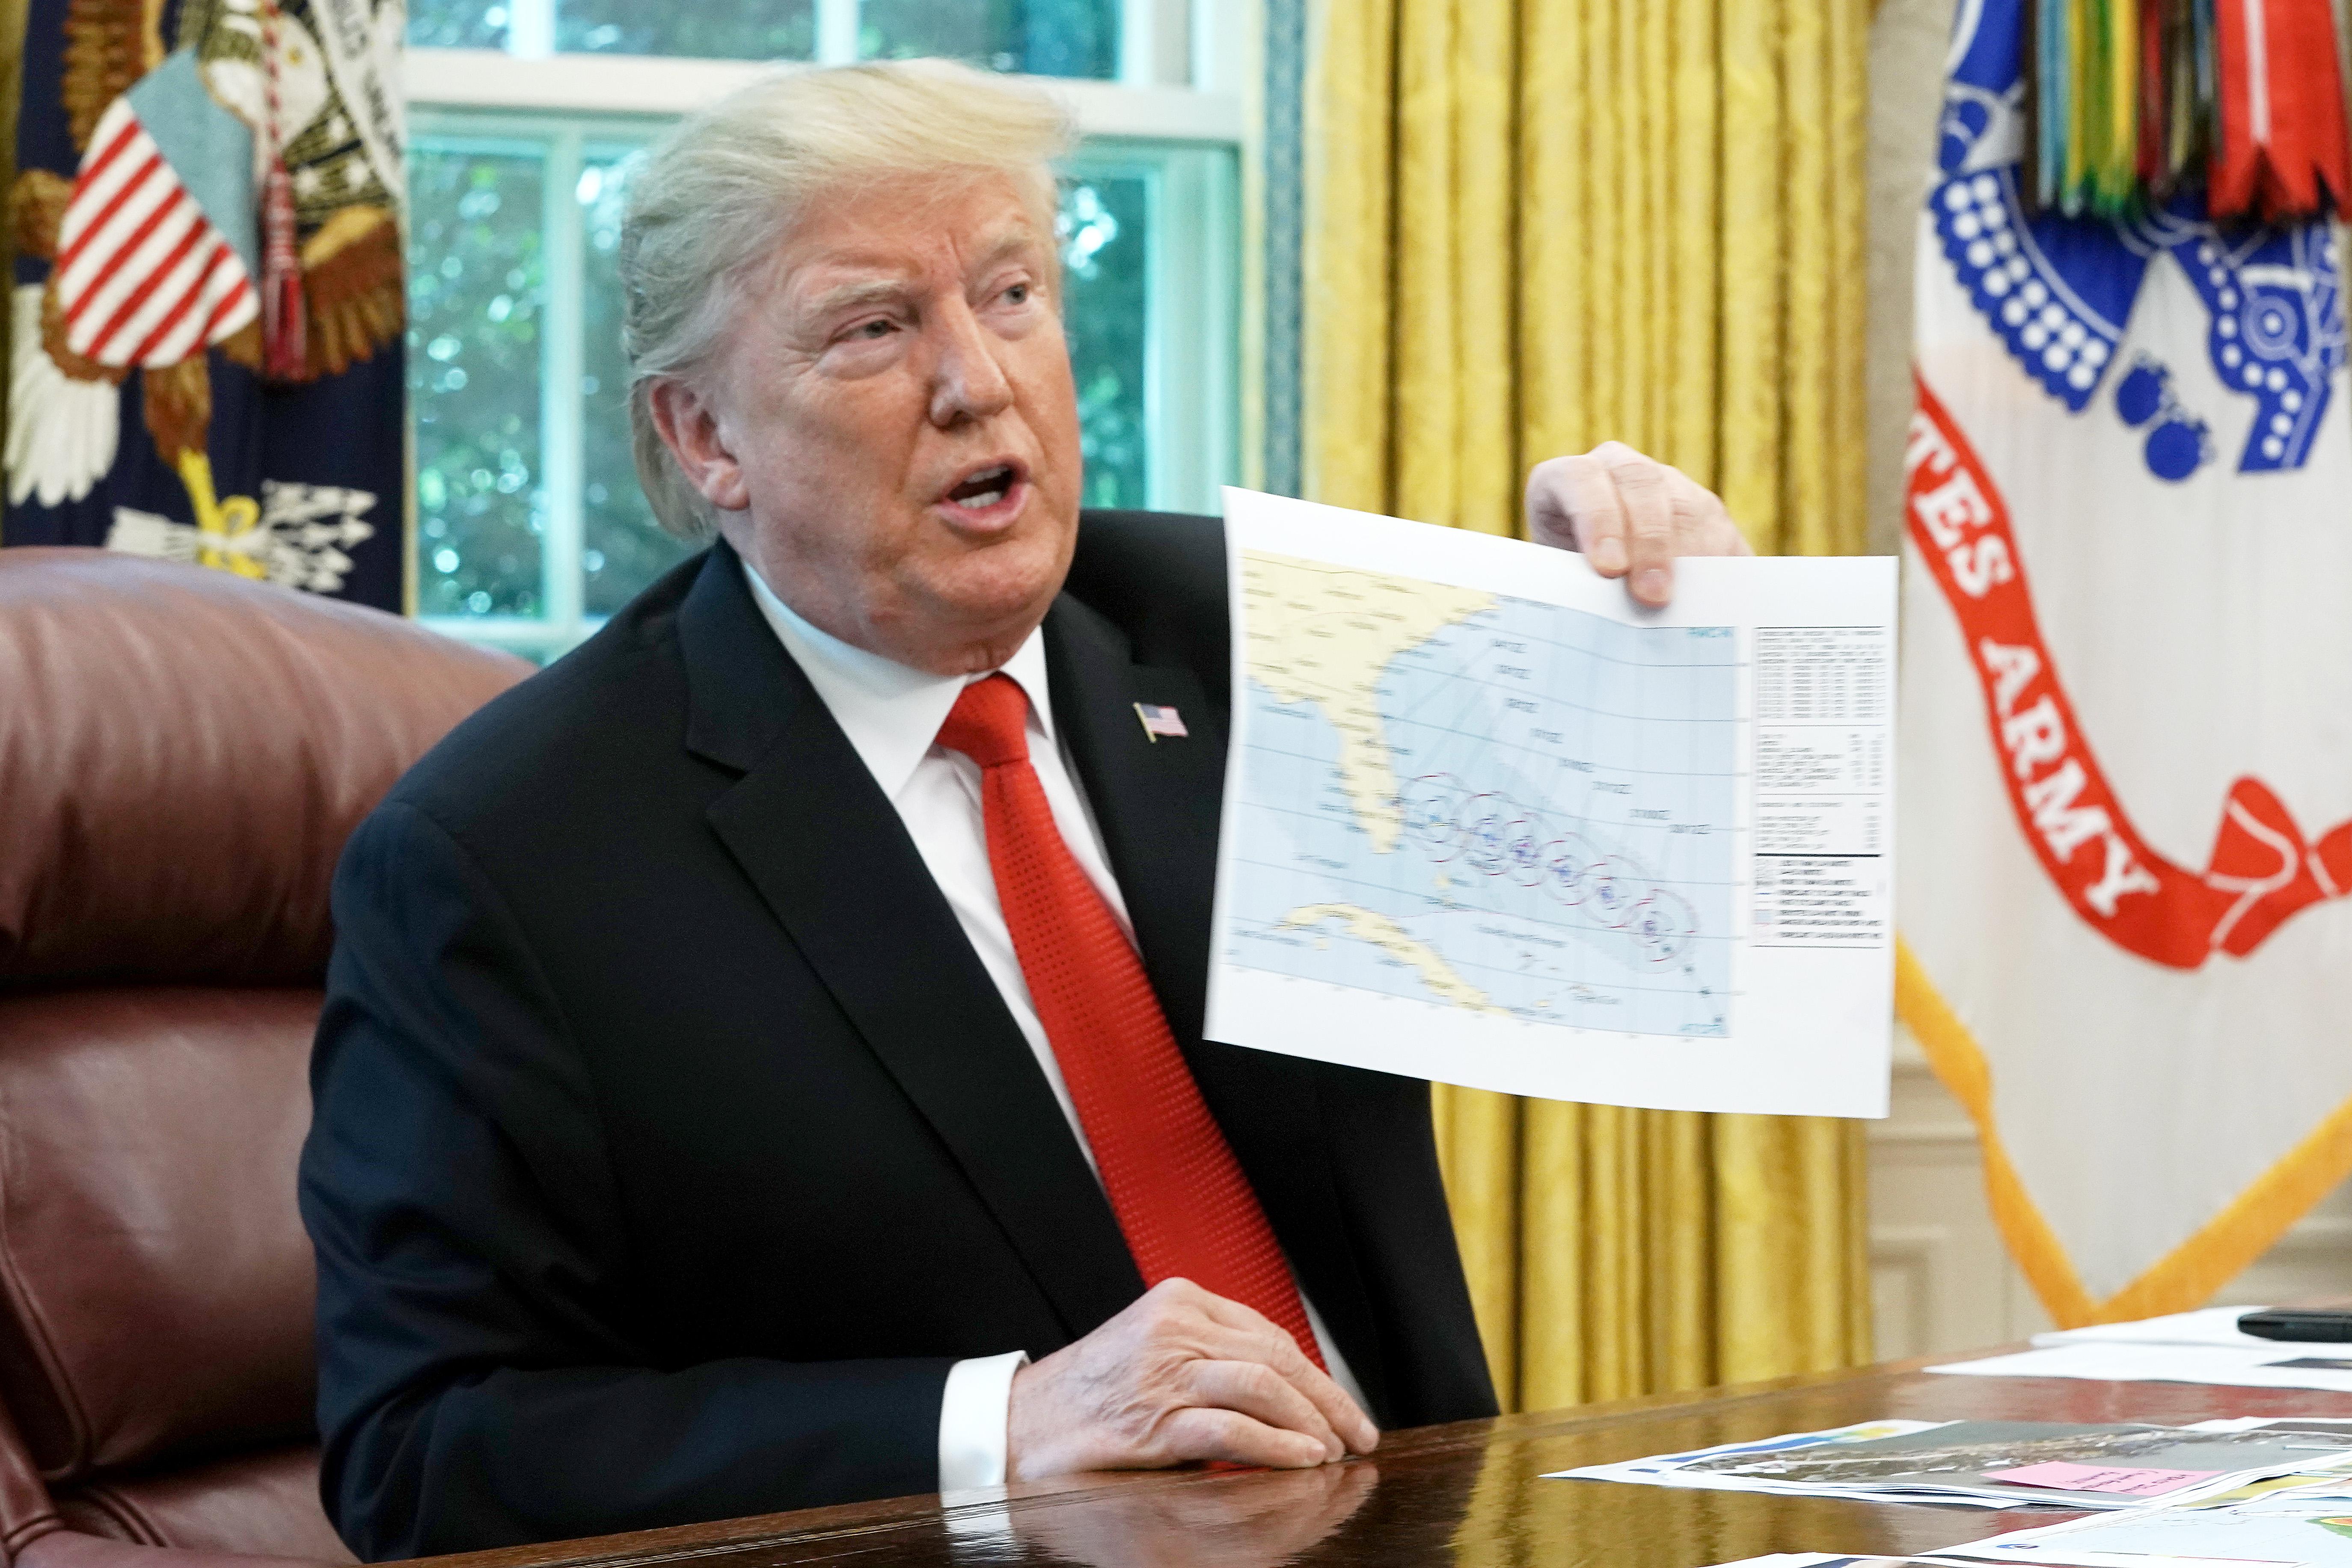 President Donald Trump shows reporters a map of a predicted path of Hurricane Dorian following a briefing from officials in the Oval Office at the White House September 4, 2019.